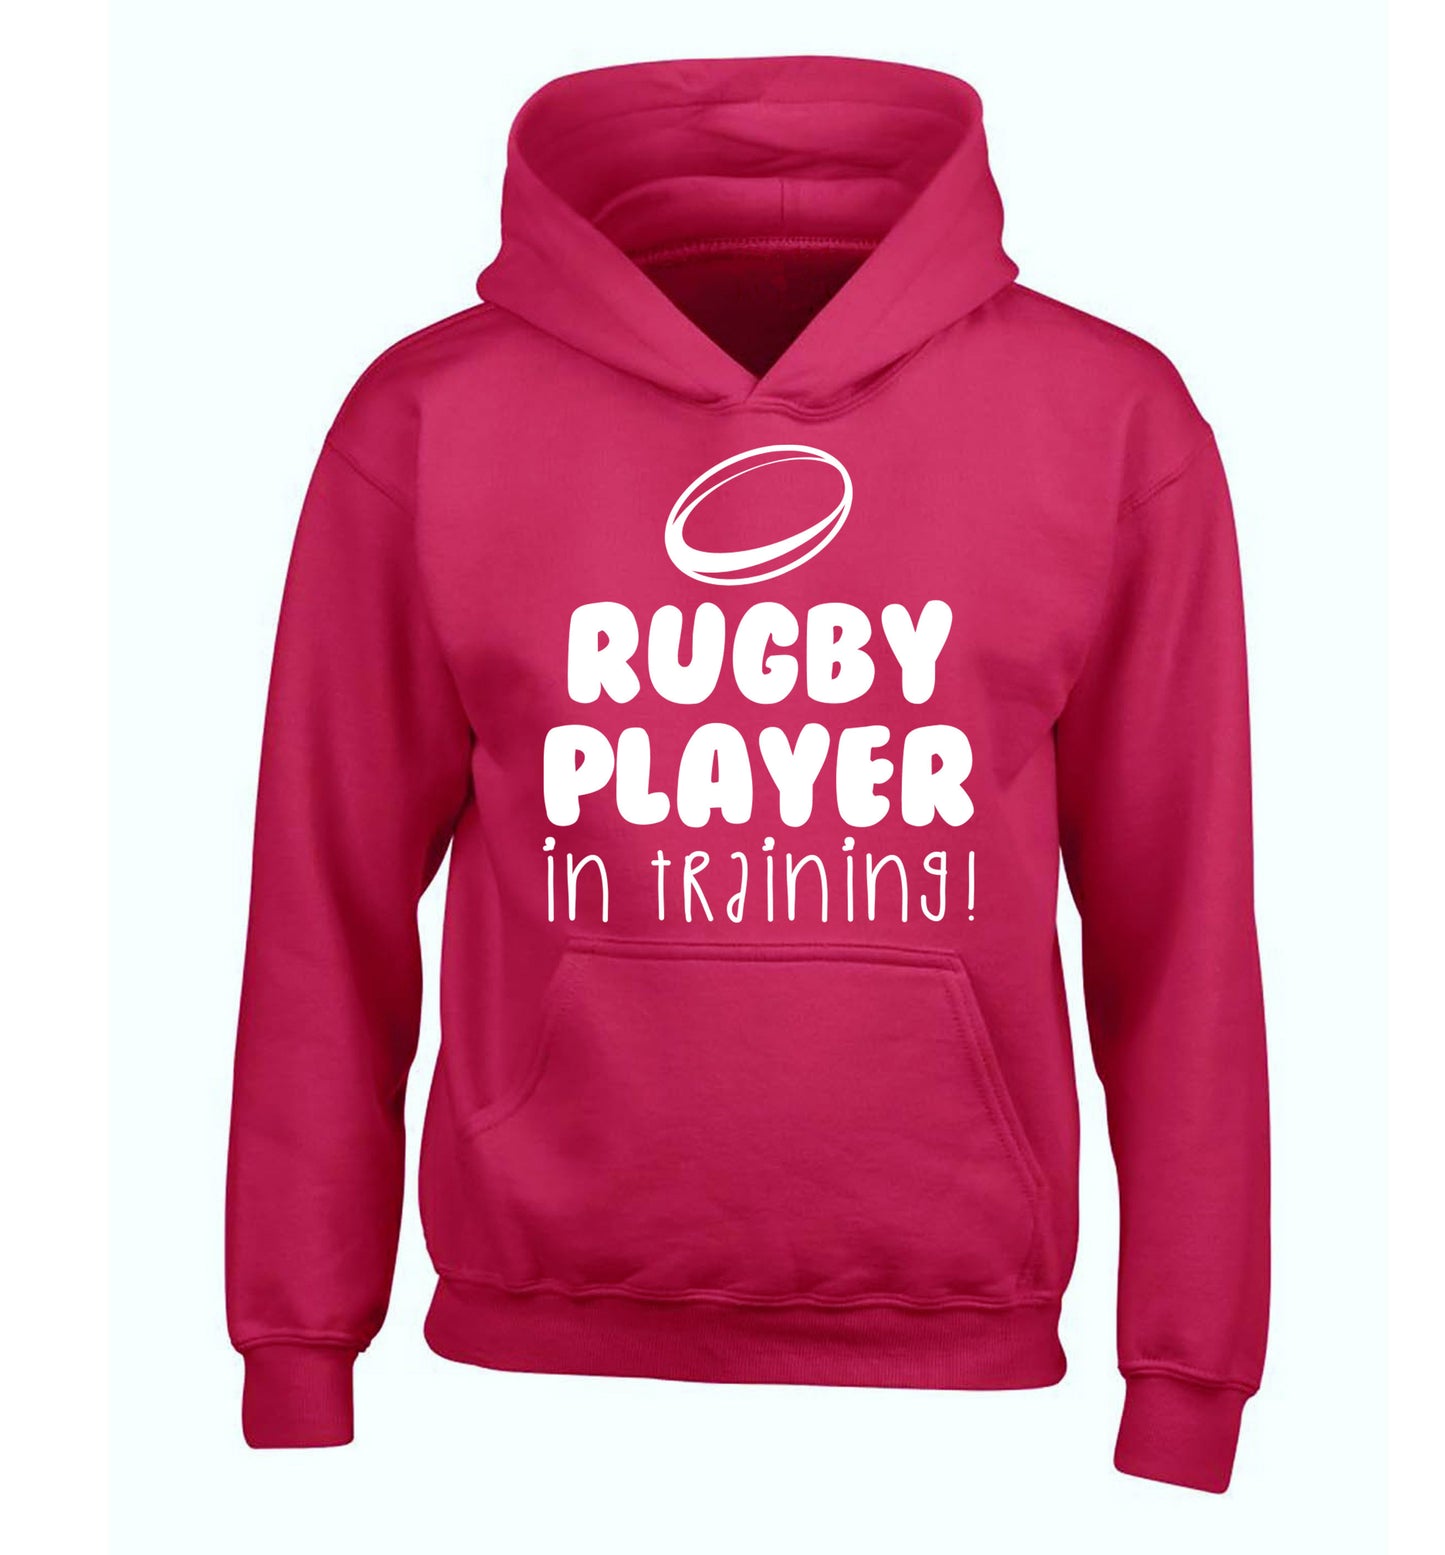 Rugby player in training children's pink hoodie 12-14 Years